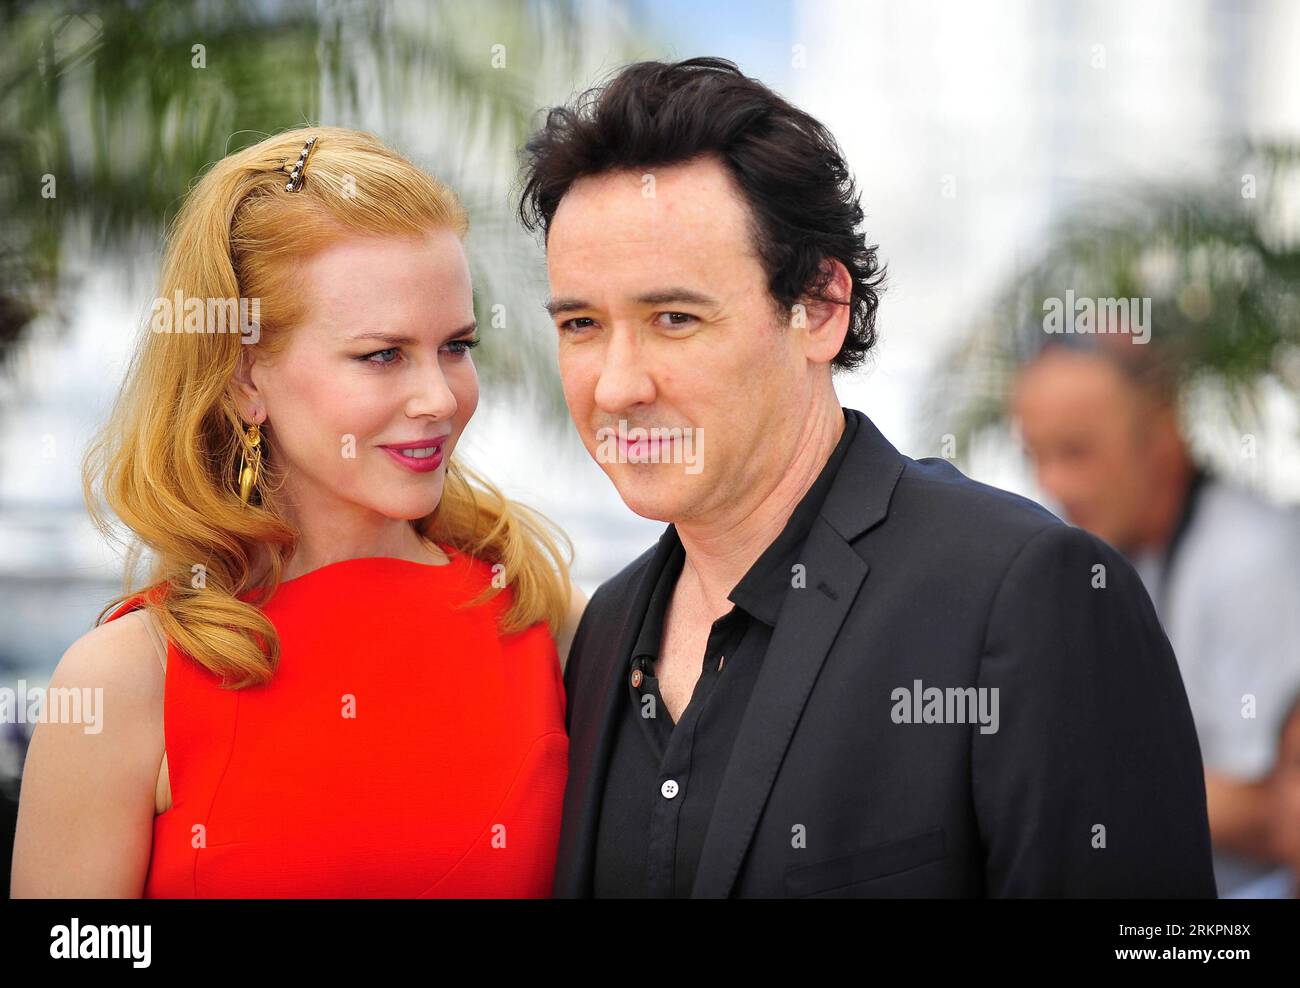 Bildnummer: 58030798  Datum: 24.05.2012  Copyright: imago/Xinhua (120524) -- CANNES, May 24, 2012 (Xinhua) -- Actress Nicole Kidman (L) and actor John Cusack pose during a photocall for the film The Paperboy directed by Lee Daniels, at the 65th Cannes Film Festival, in Cannes, southern France, May 24, 2012. (Xinhua/Ye Pingfan)(srb) FRANCE-CANNES-FILM FESTIVAL-PHOTOCALL-THE PAPERBOY PUBLICATIONxNOTxINxCHN Kultur Entertainment People Film 65. Internationale Filmfestspiele Cannes x0x xkg 2012 quer      58030798 Date 24 05 2012 Copyright Imago XINHUA  Cannes May 24 2012 XINHUA actress Nicole Kidma Stock Photo